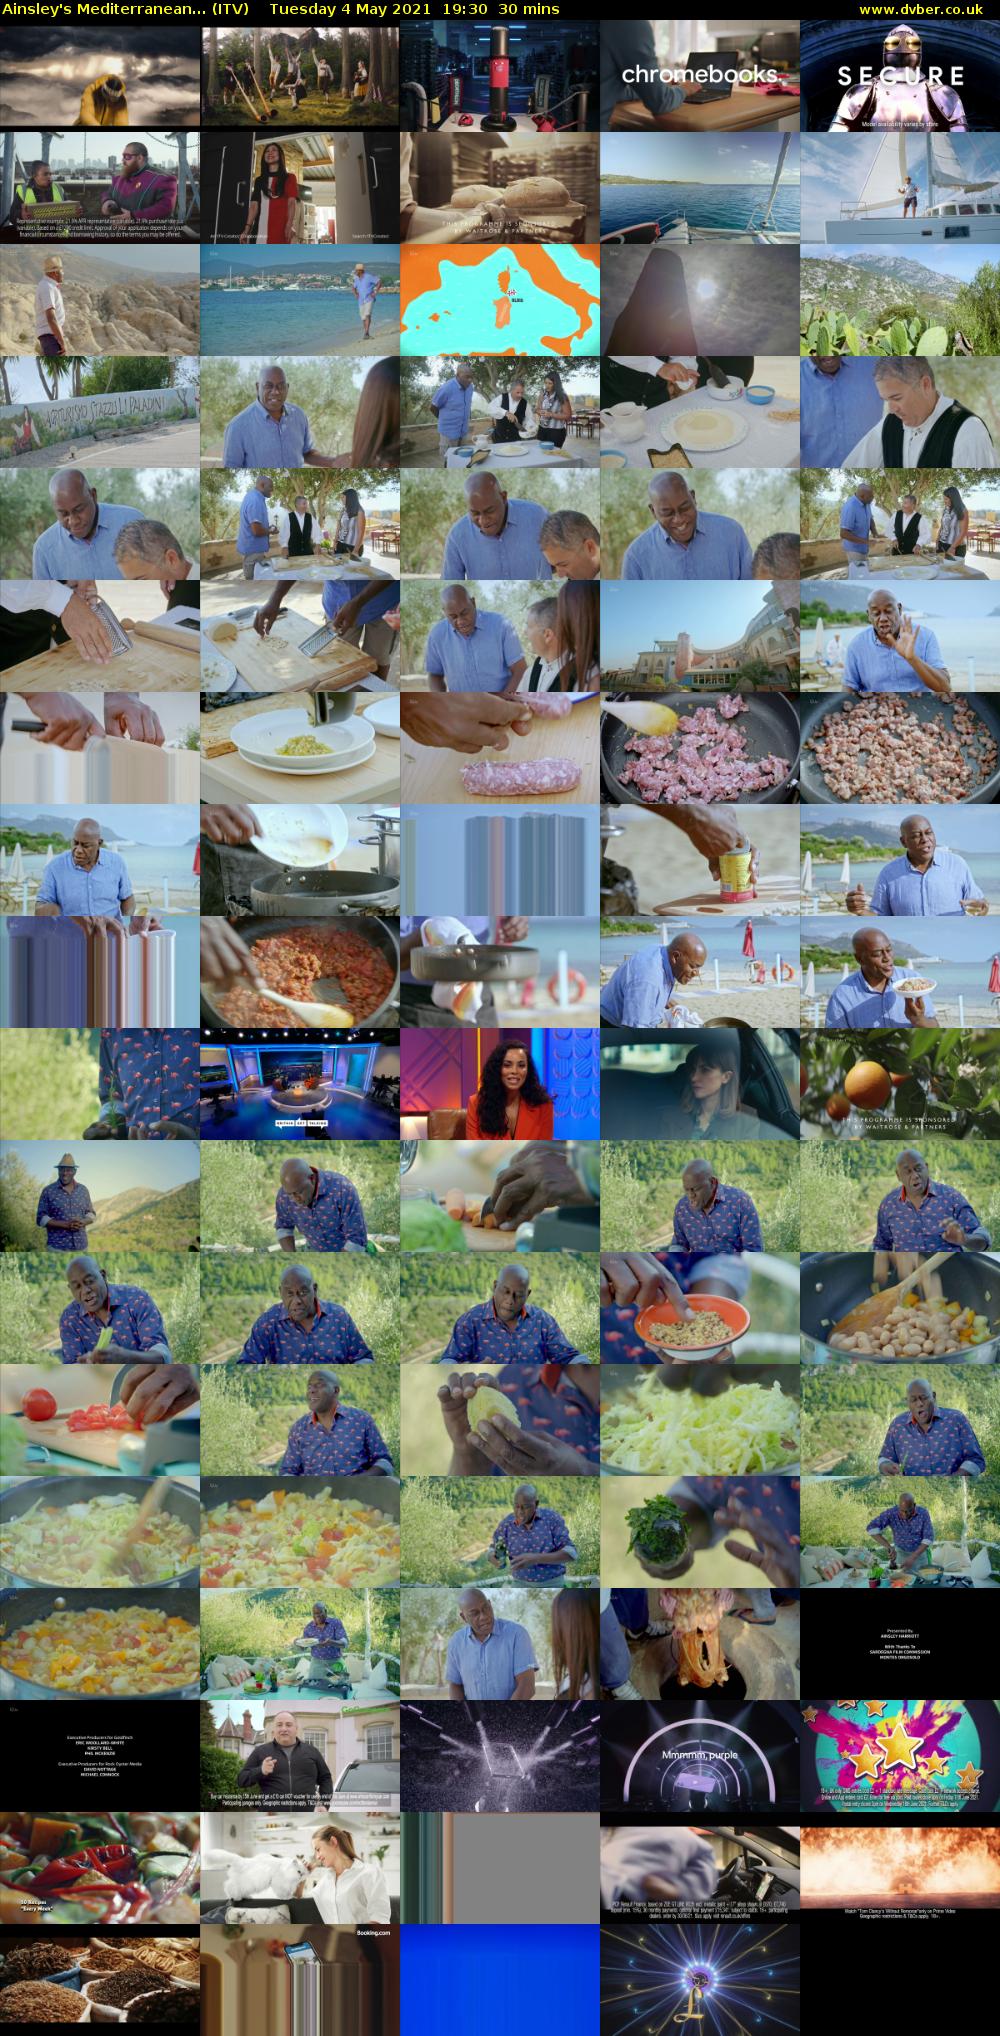 Ainsley's Mediterranean... (ITV) Tuesday 4 May 2021 19:30 - 20:00